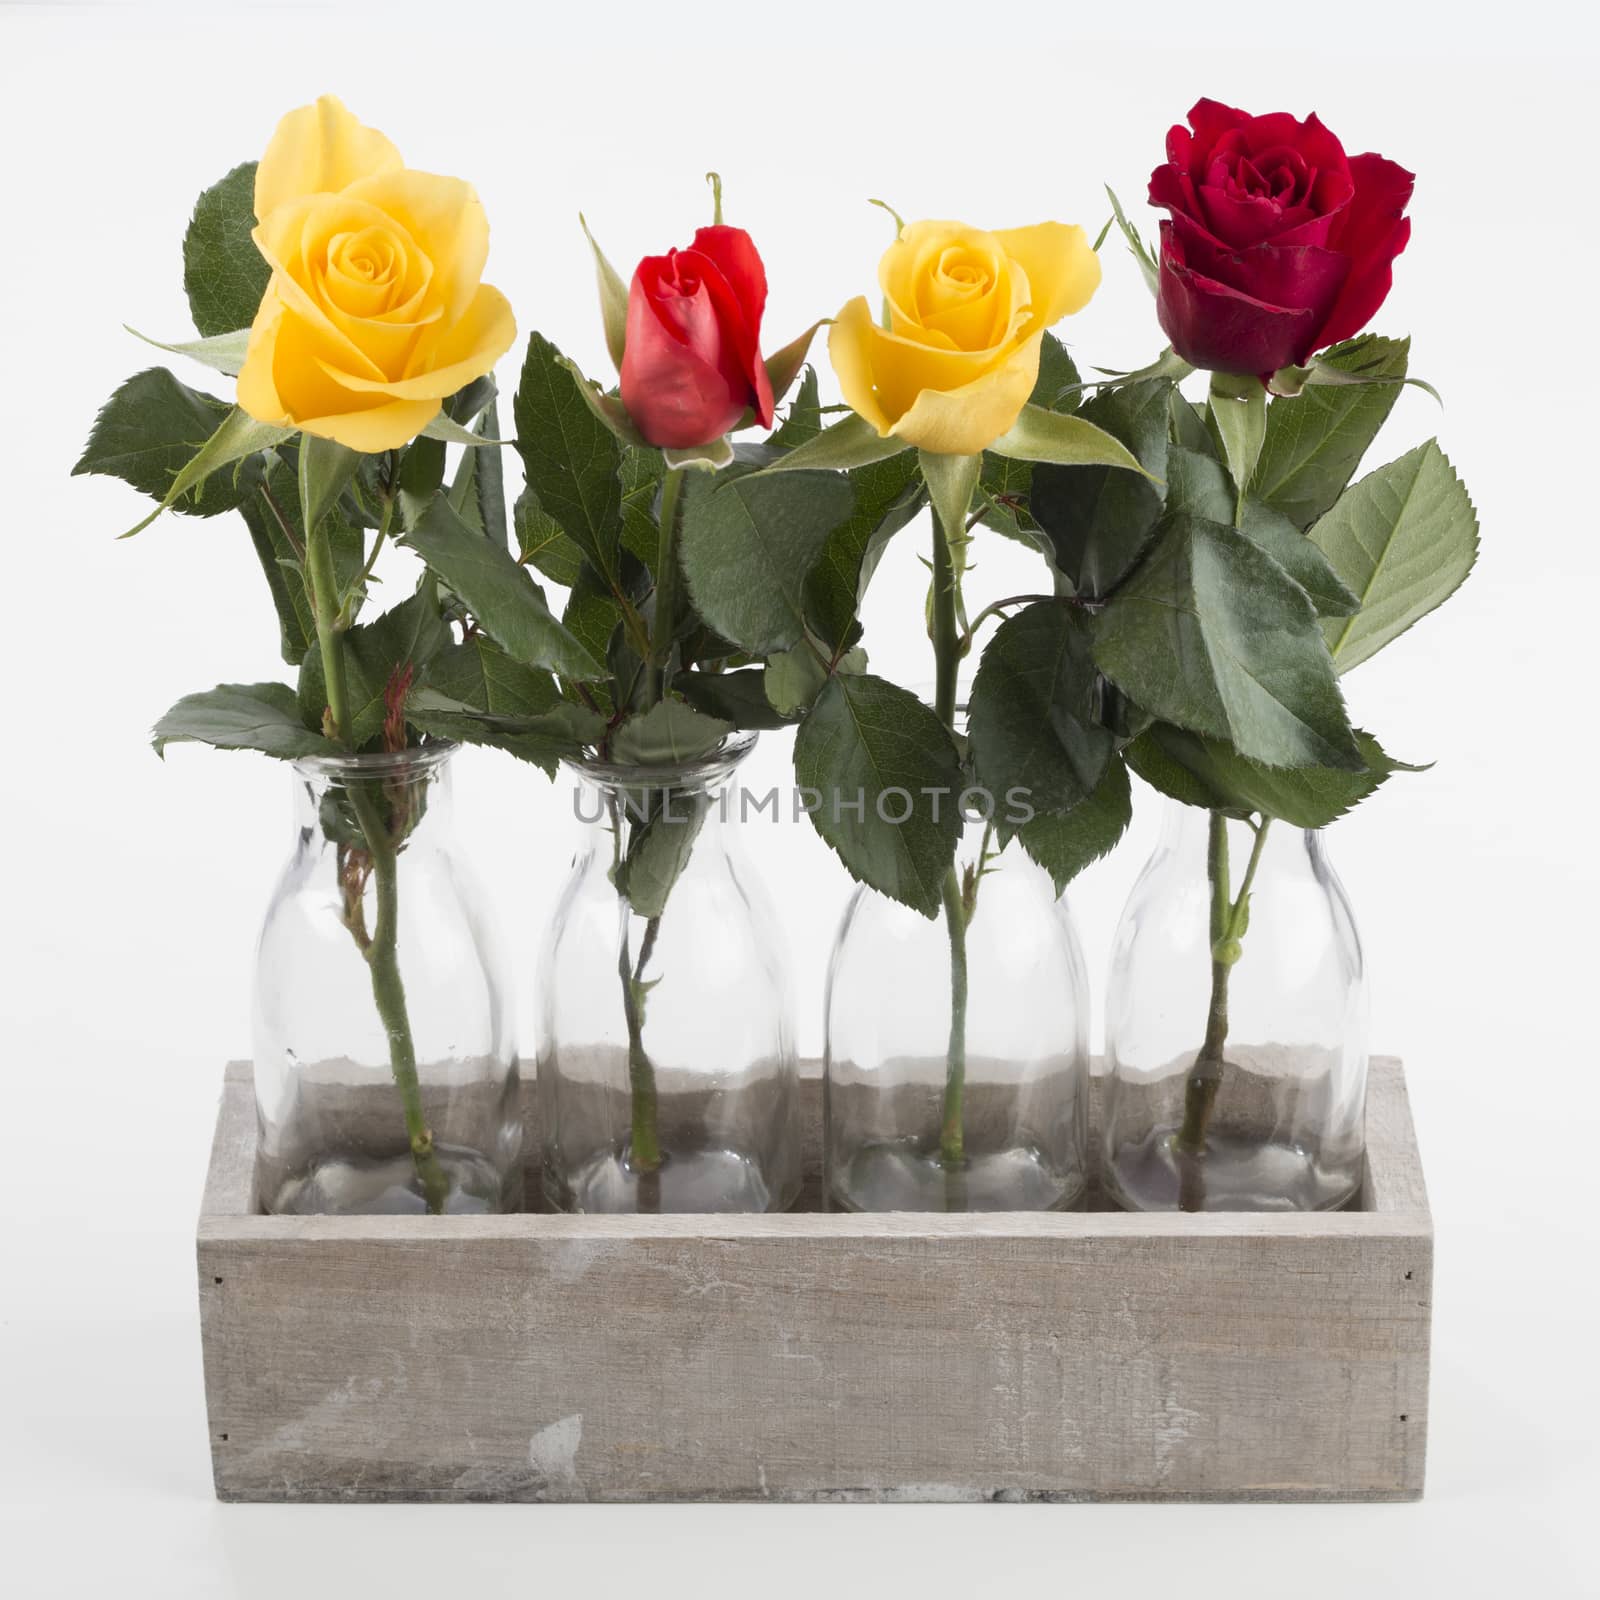 Four roses in four vases in wooden box, isolated on white background